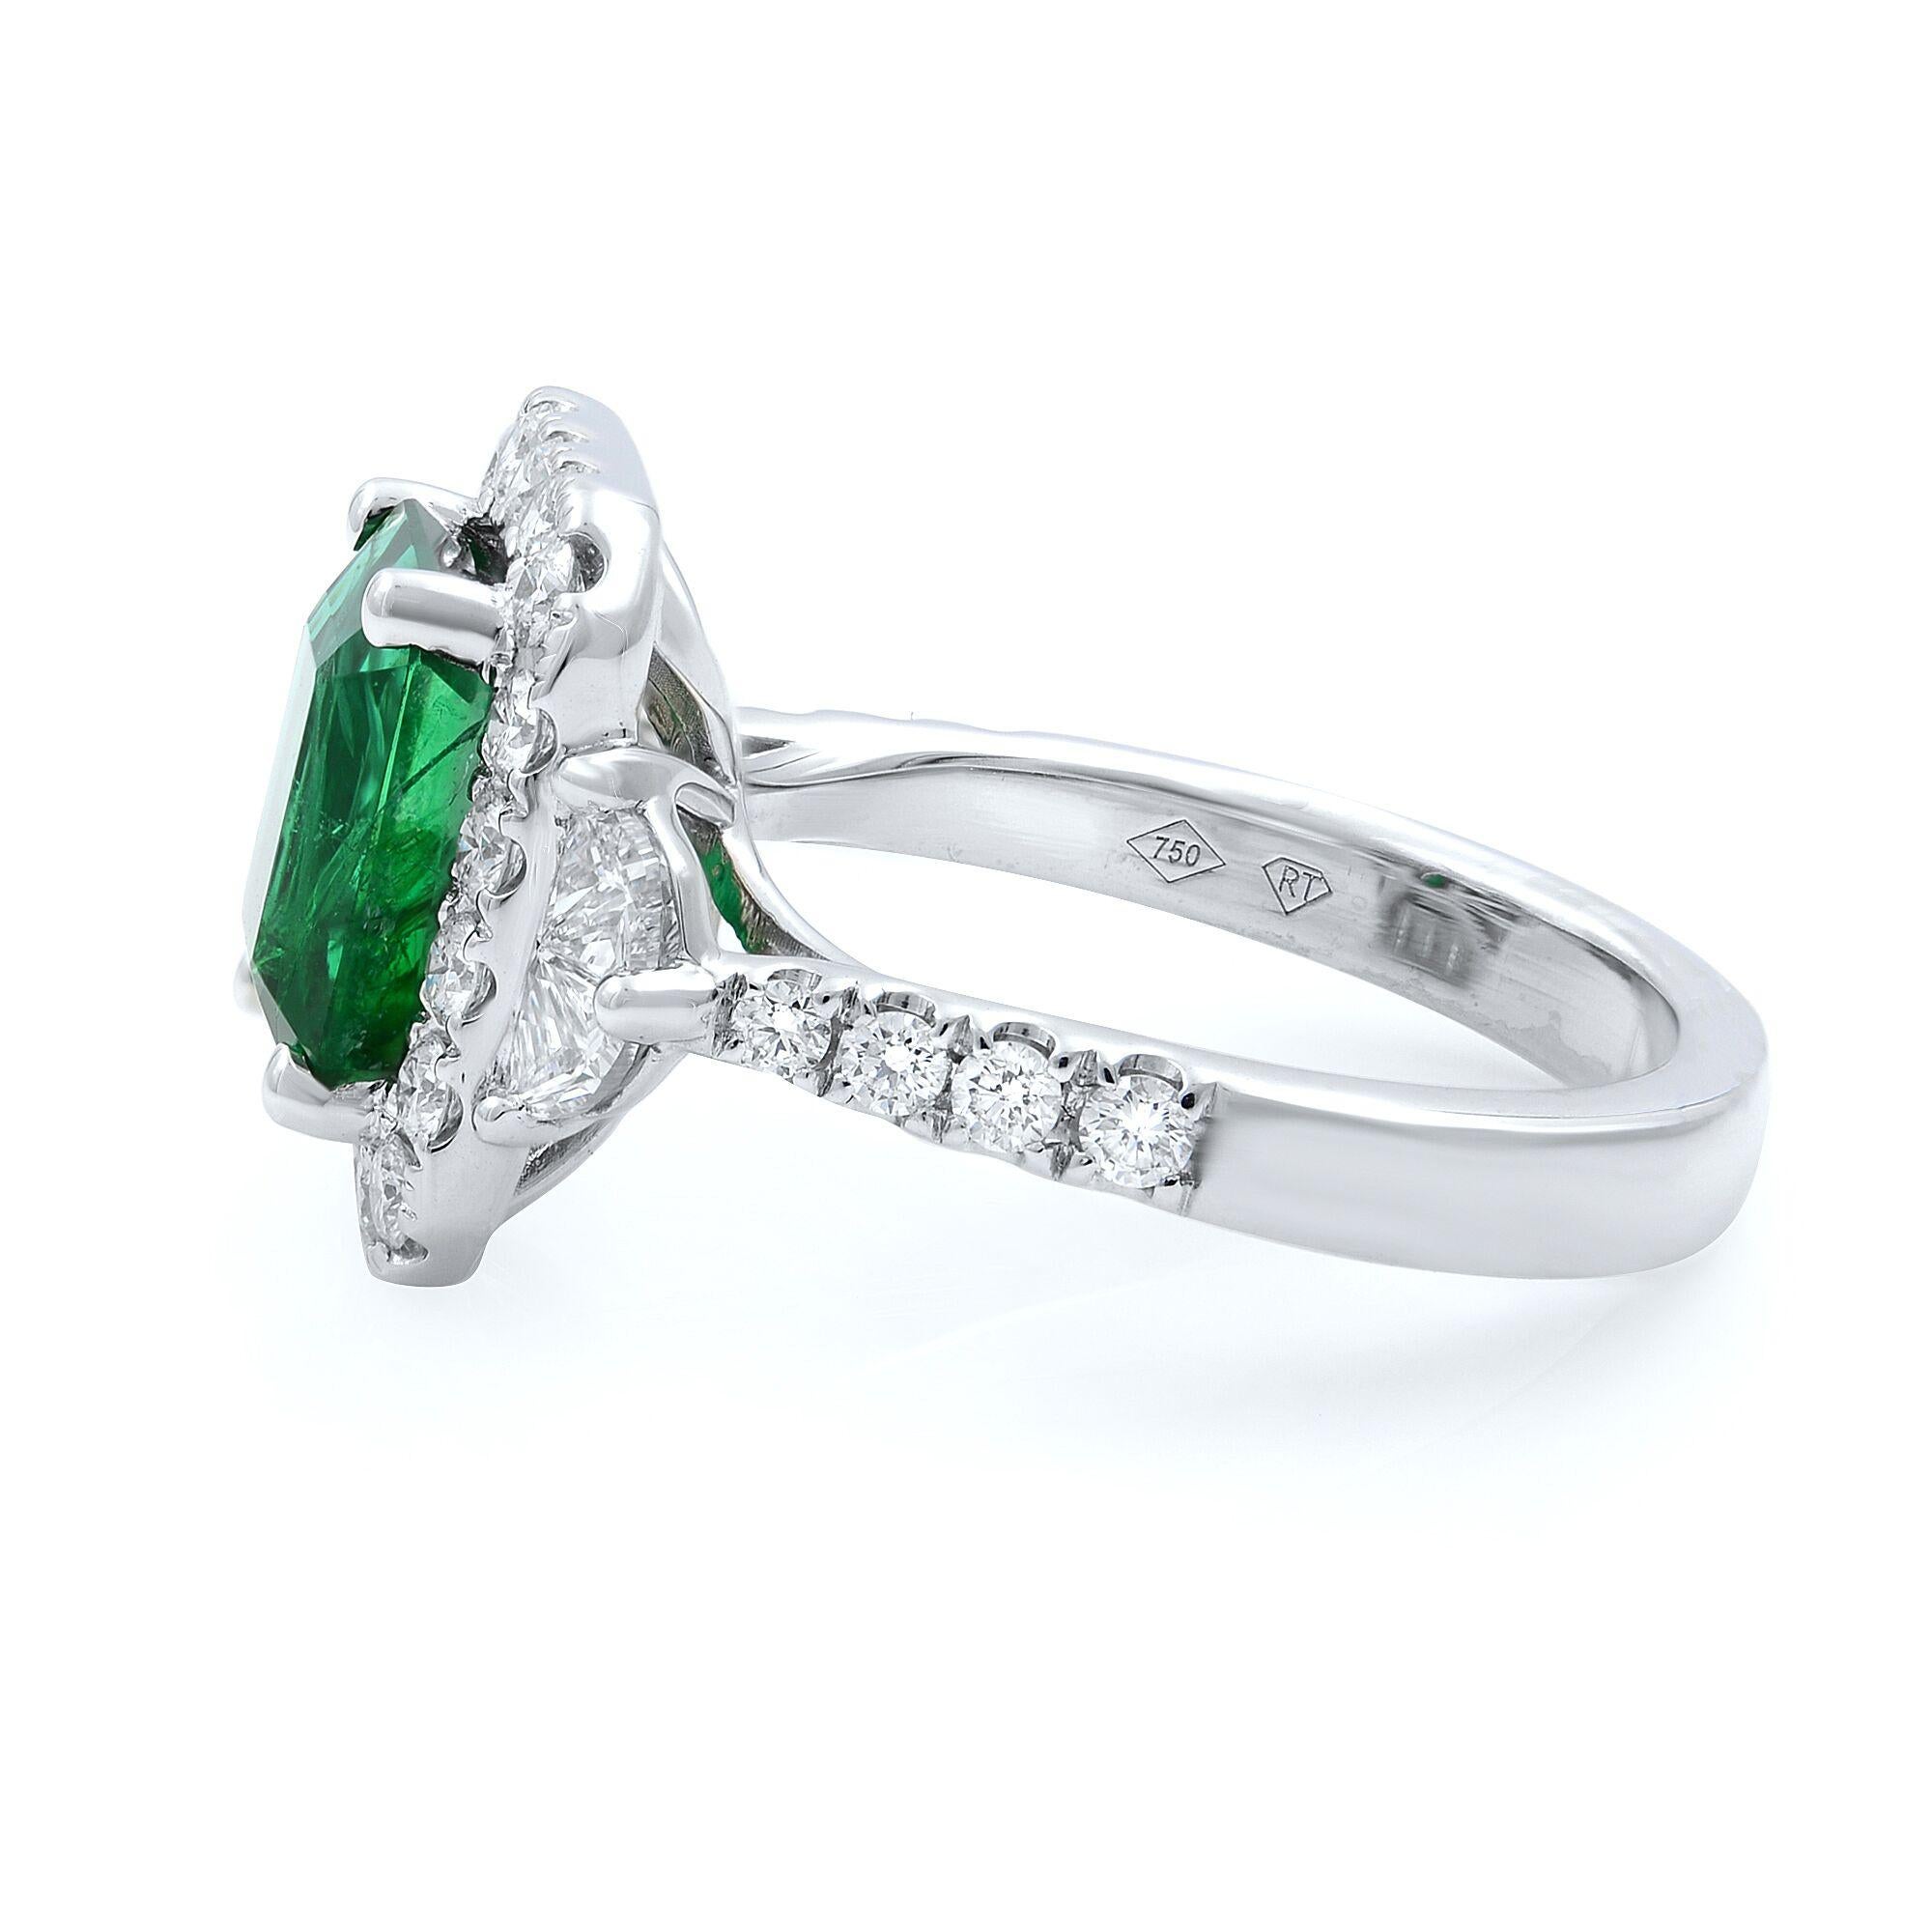 This stunning ring is set with emerald and shiny natural diamonds micro pave set halo and shank. Carat weight: emerald: 3.10cts, diamonds: 1.19cts. Crafted in 18K white gold. Ring size: 6.75. GIA certificate is included. 